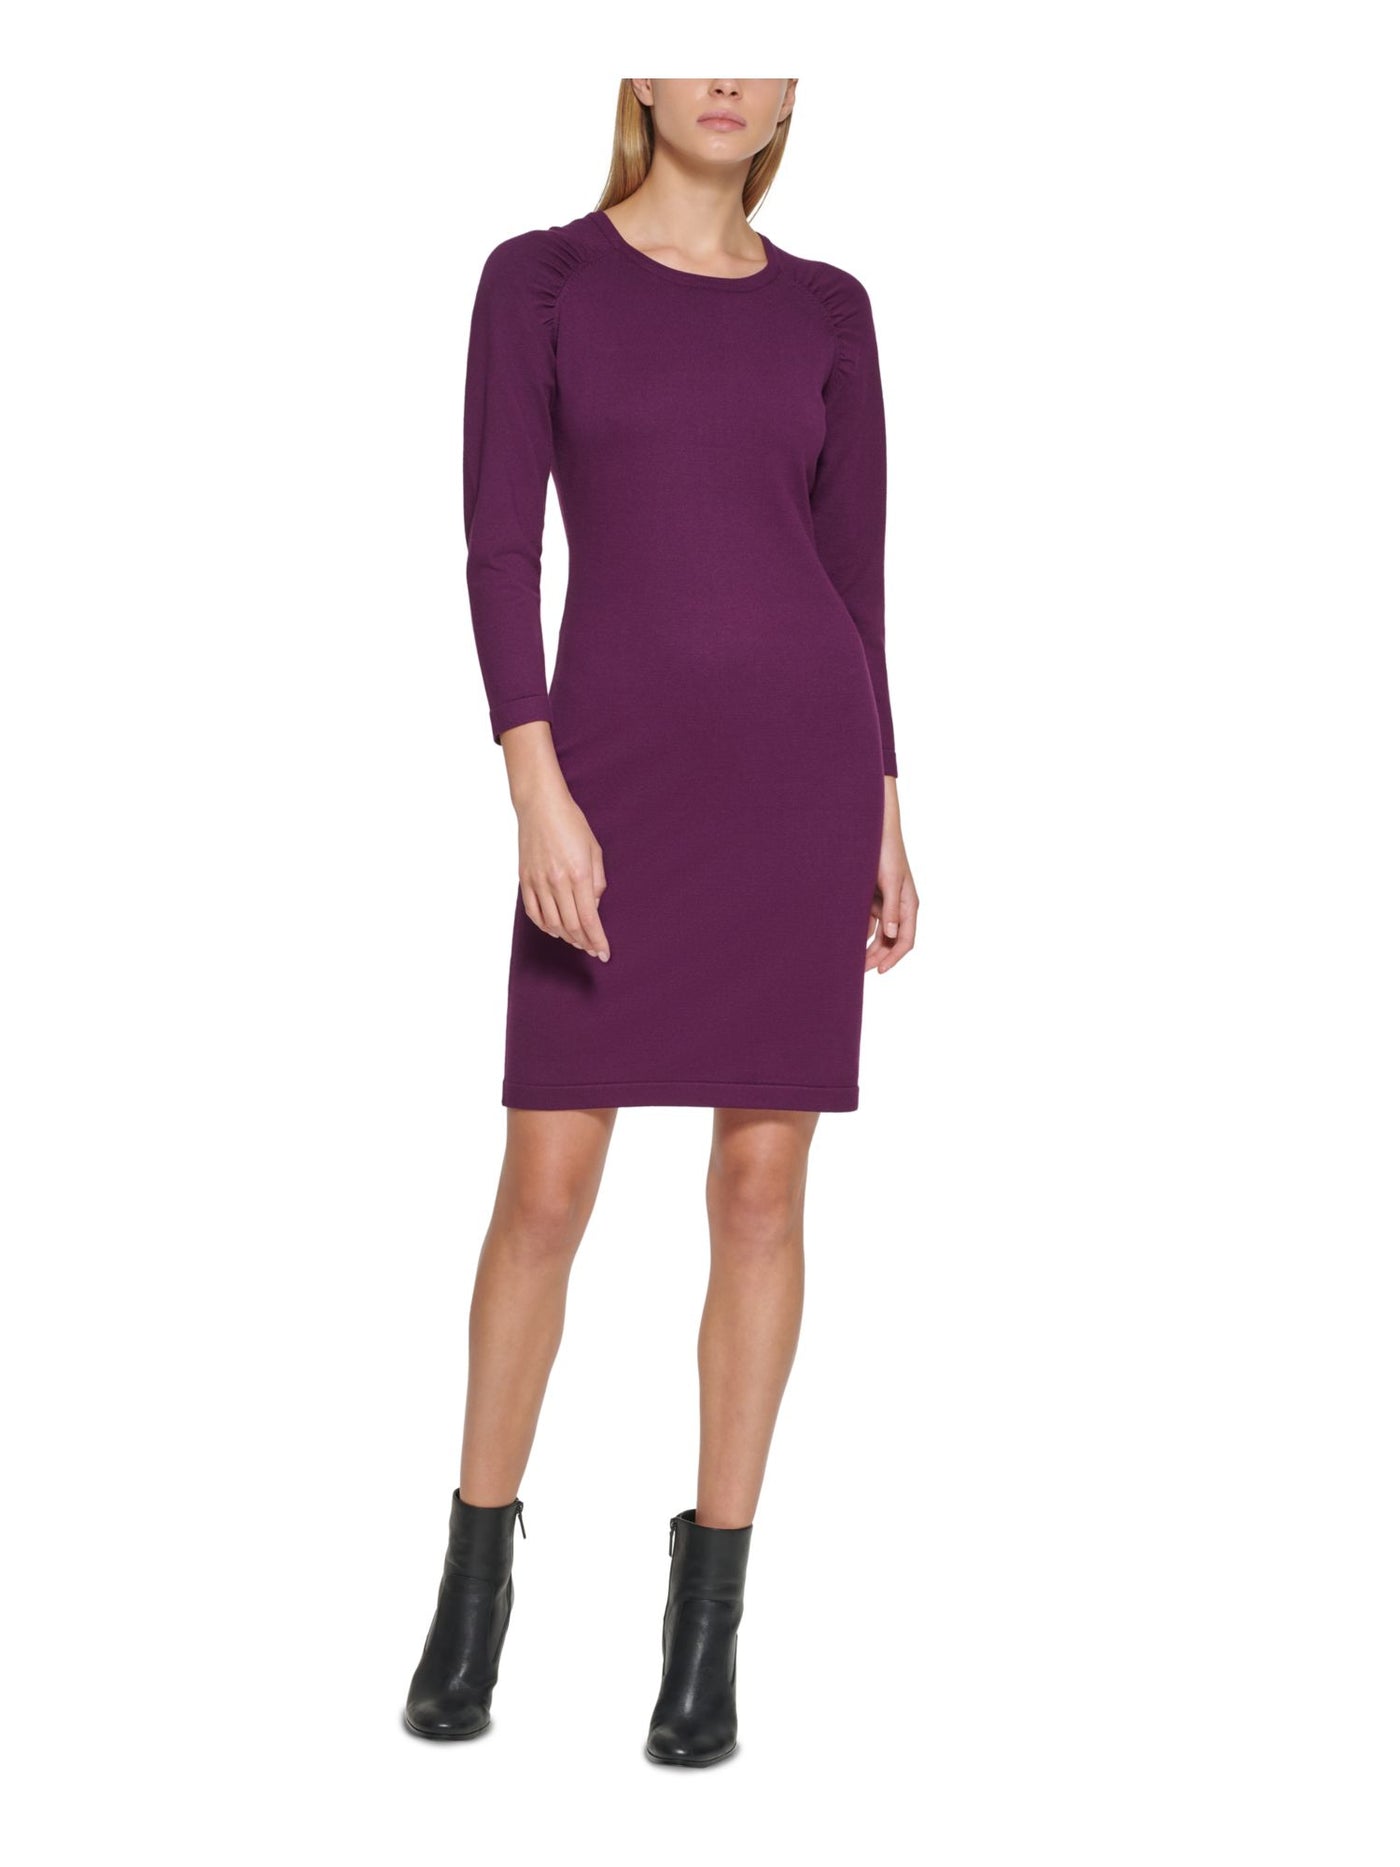 CALVIN KLEIN Womens 3/4 Sleeve Round Neck Above The Knee Party Sweater Dress